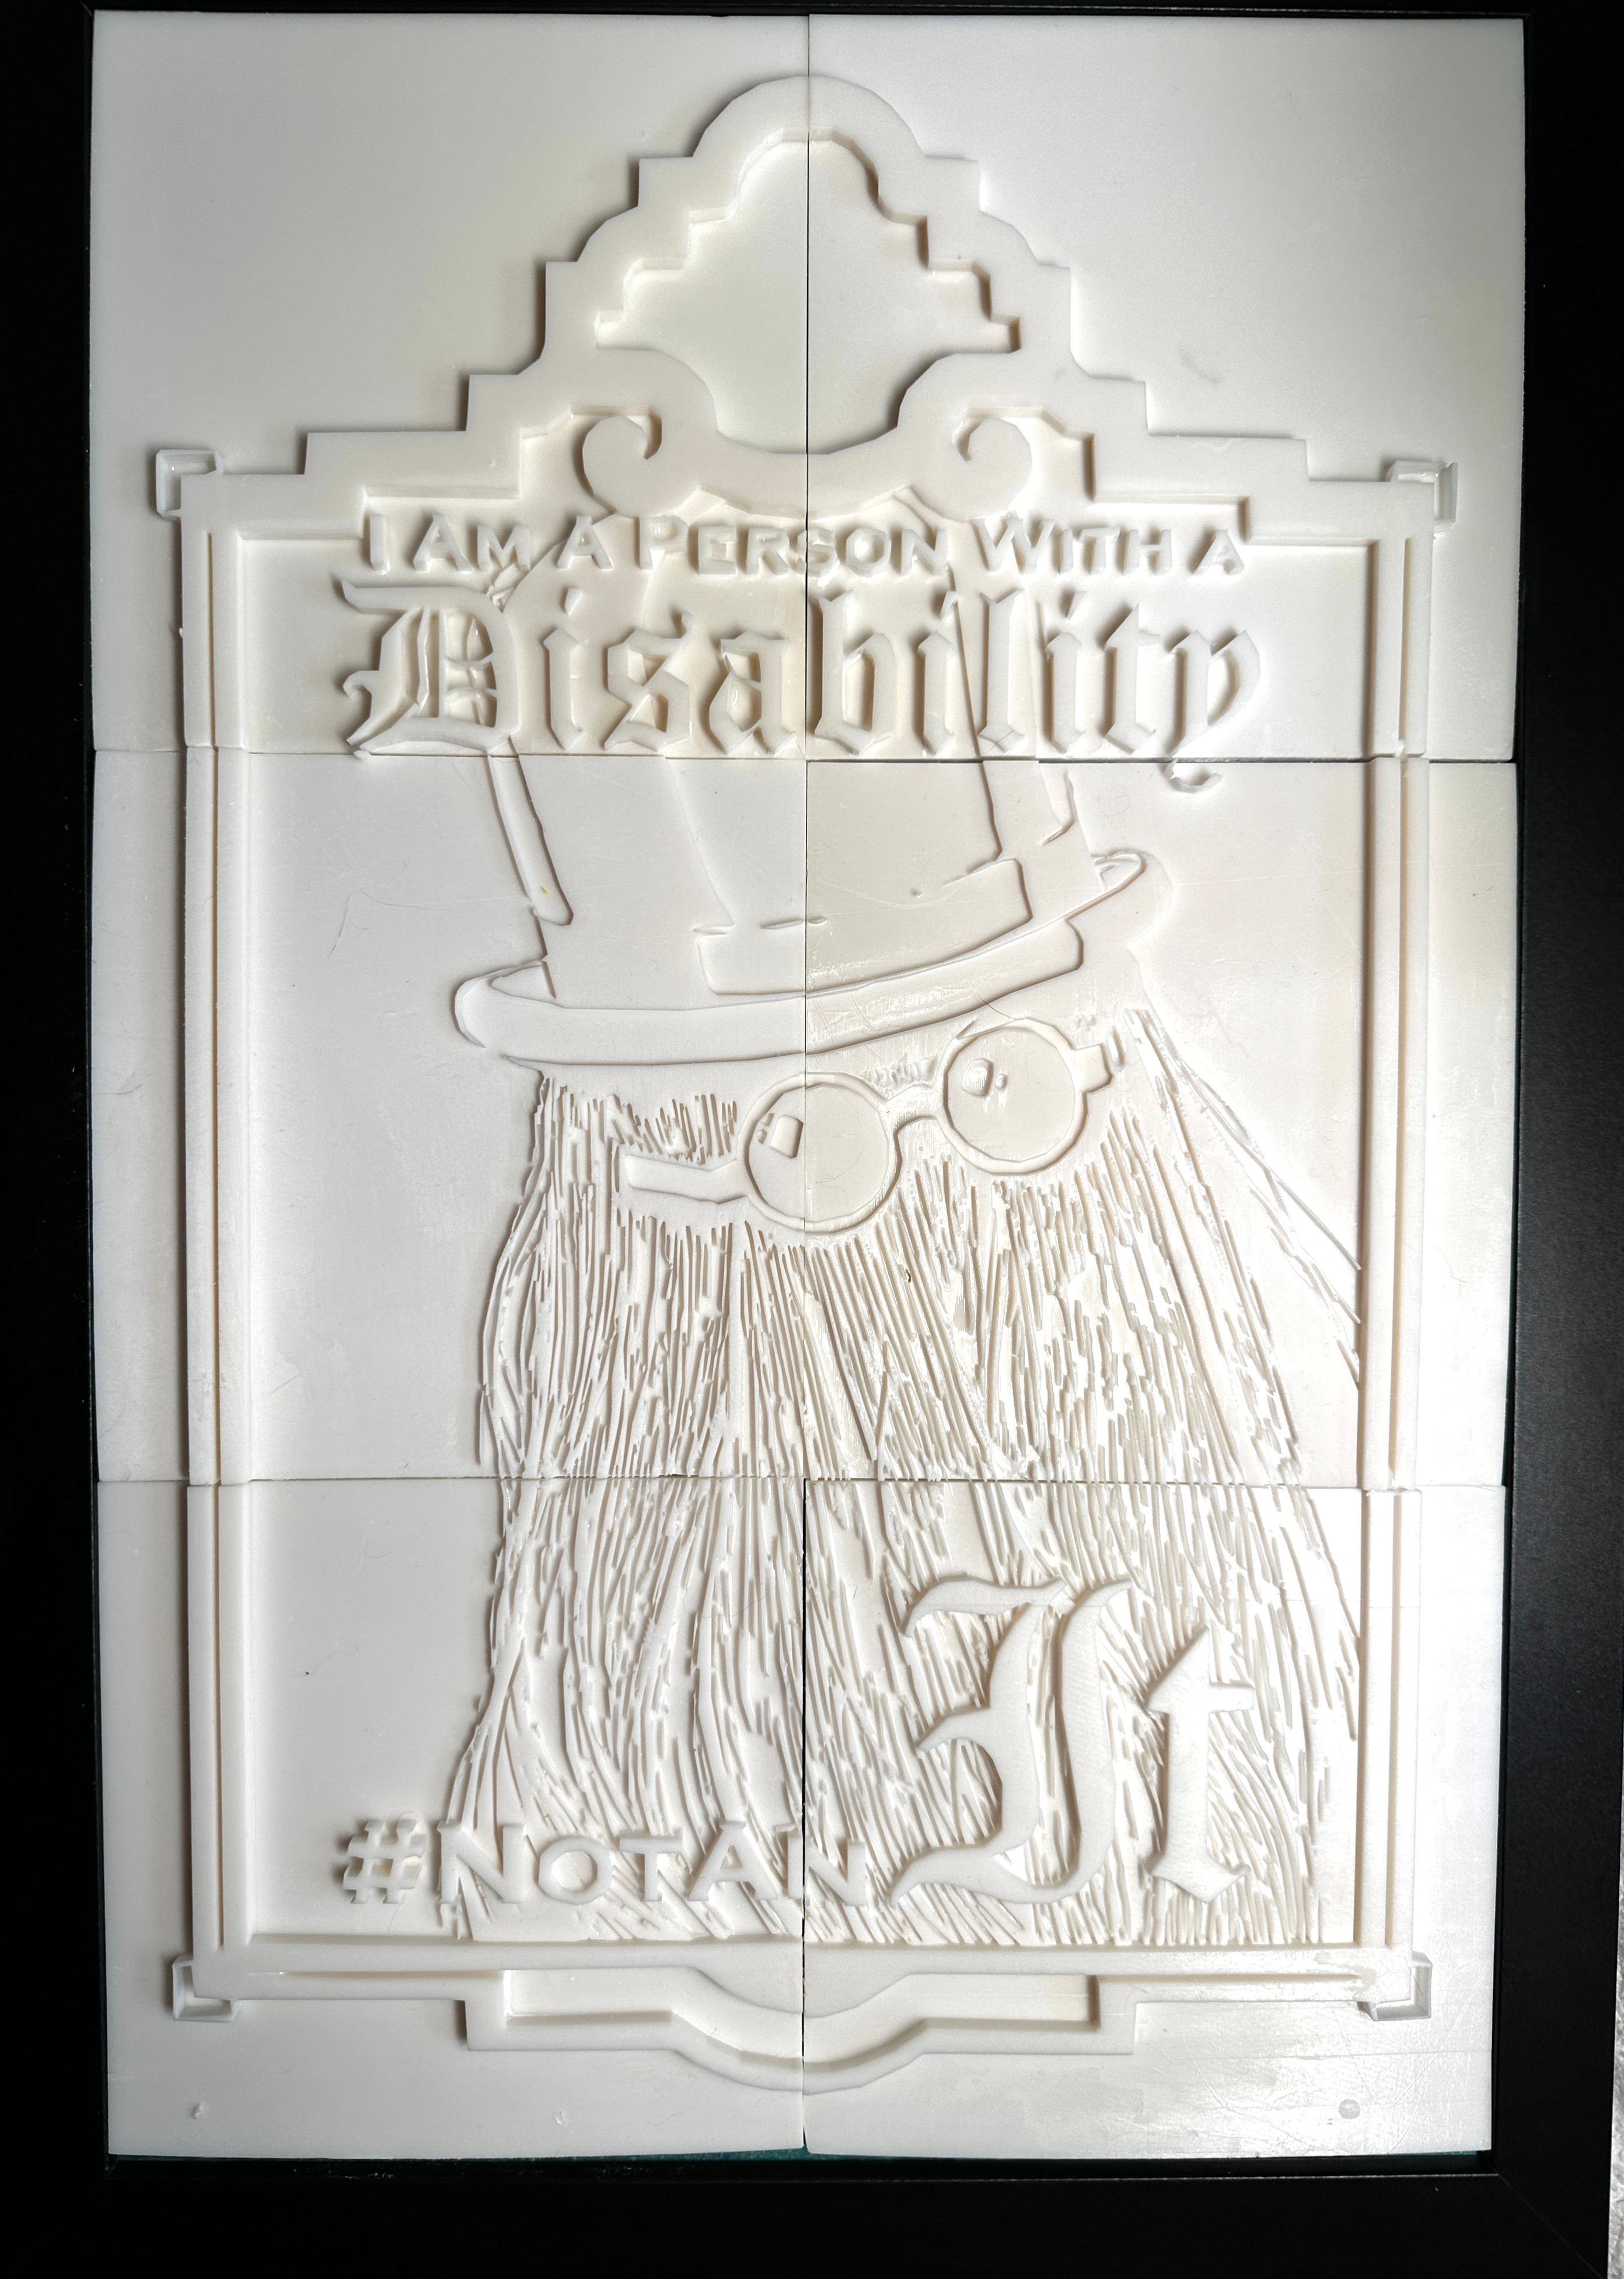 A photo of the tactile 3d print for #NotAnIt